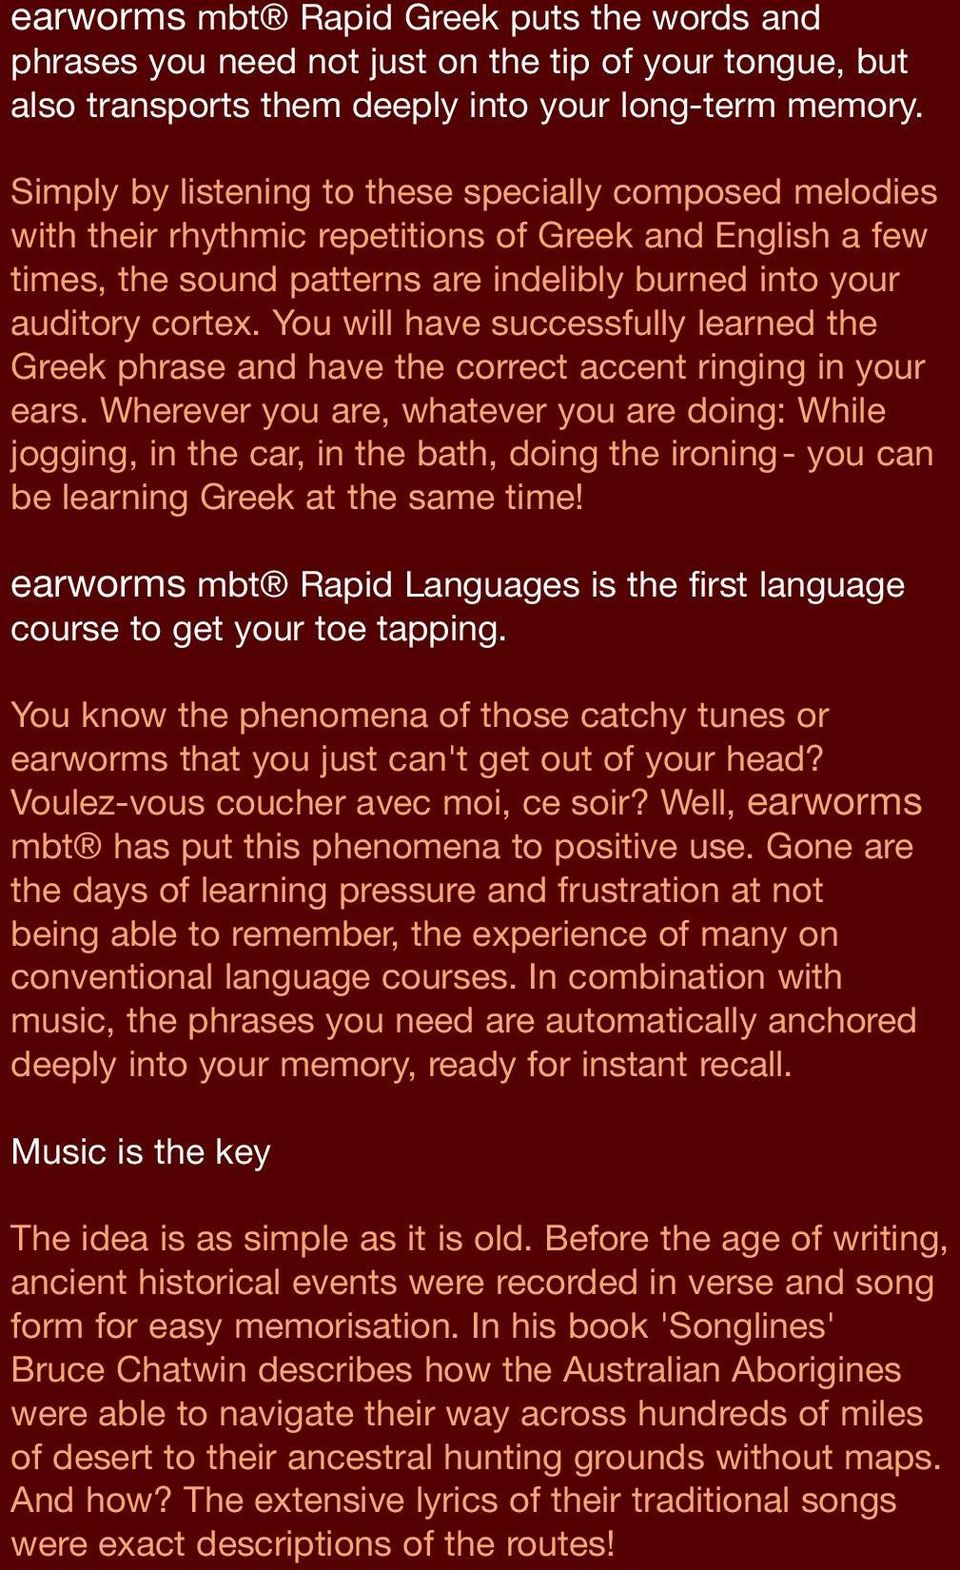 You will have successfully learned the Greek phrase and have the correct accent ringing in your ears.